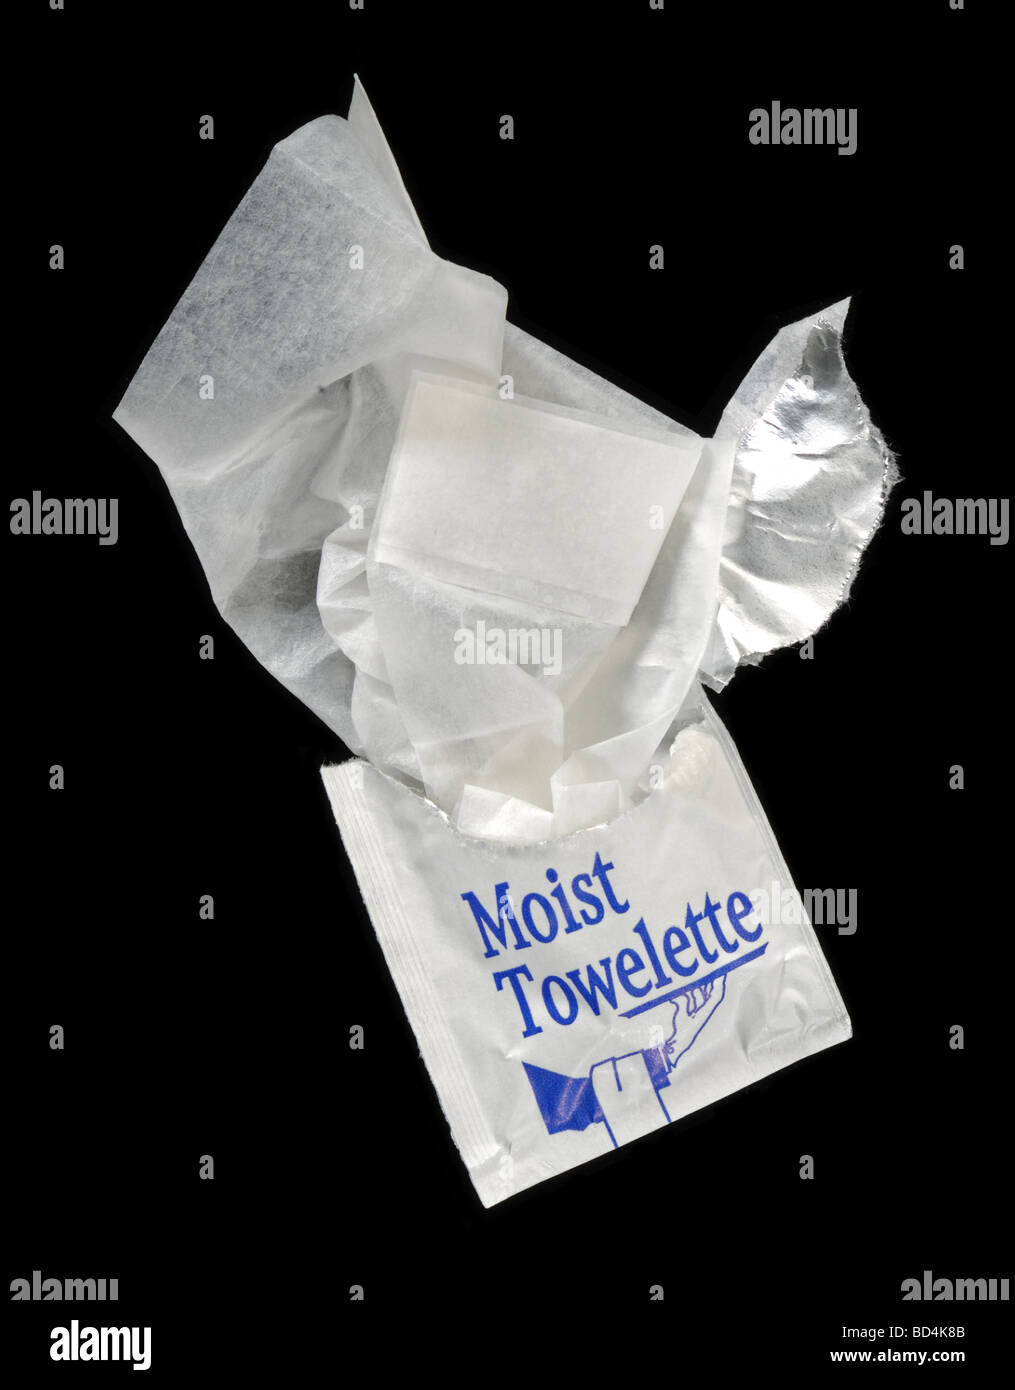 A moist towelette opened Stock Photo